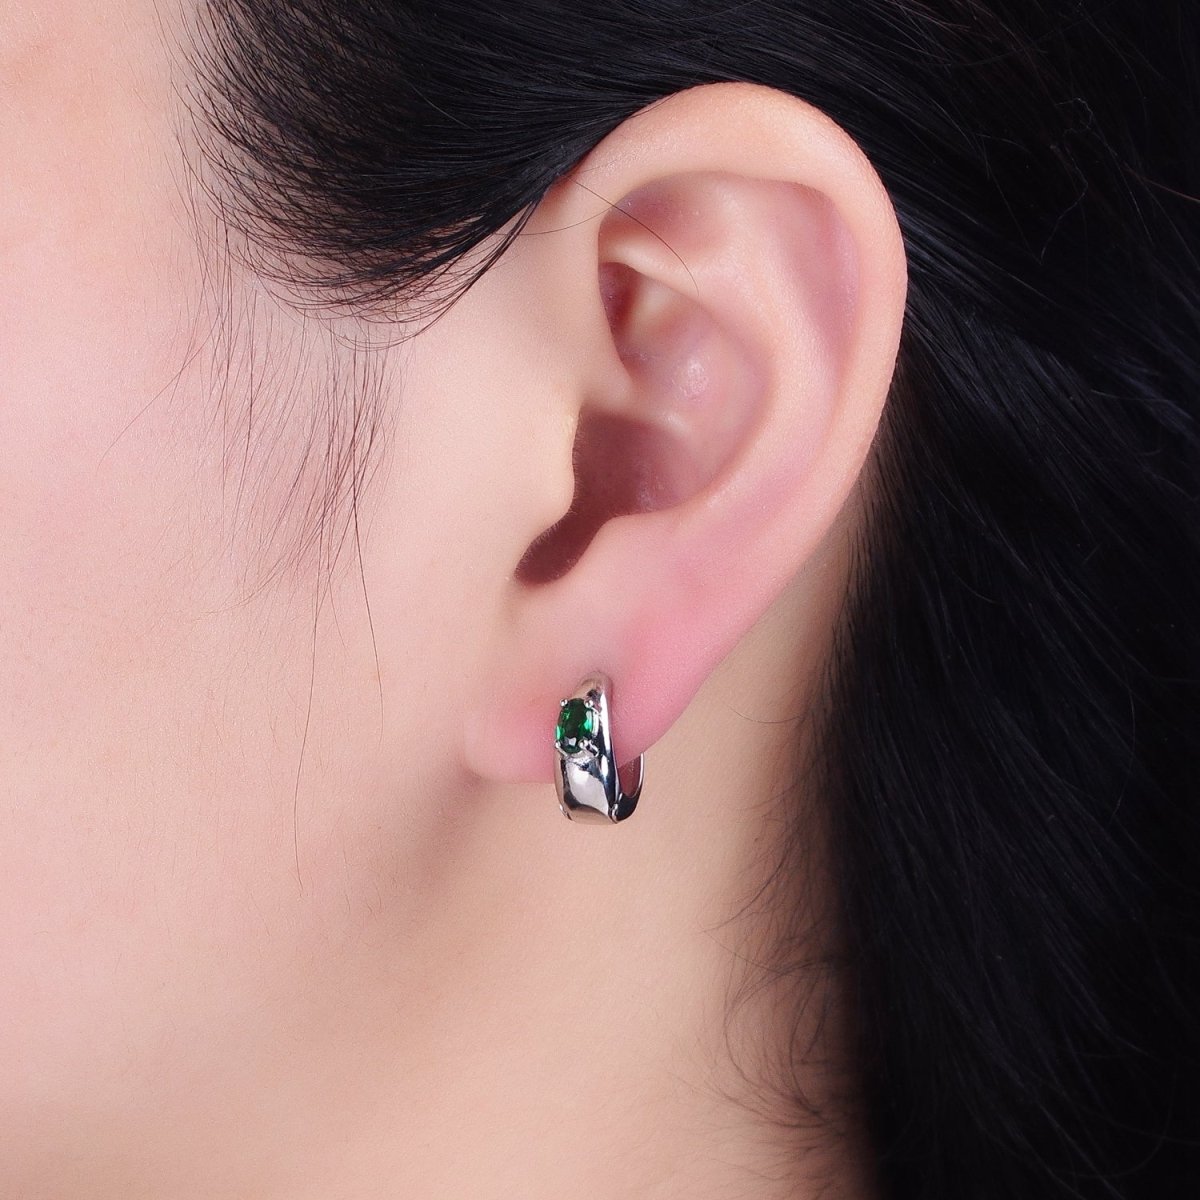 White Gold Filled Emerald Green Oval Dome 13mm Huggie Earrings | AB1501 - DLUXCA